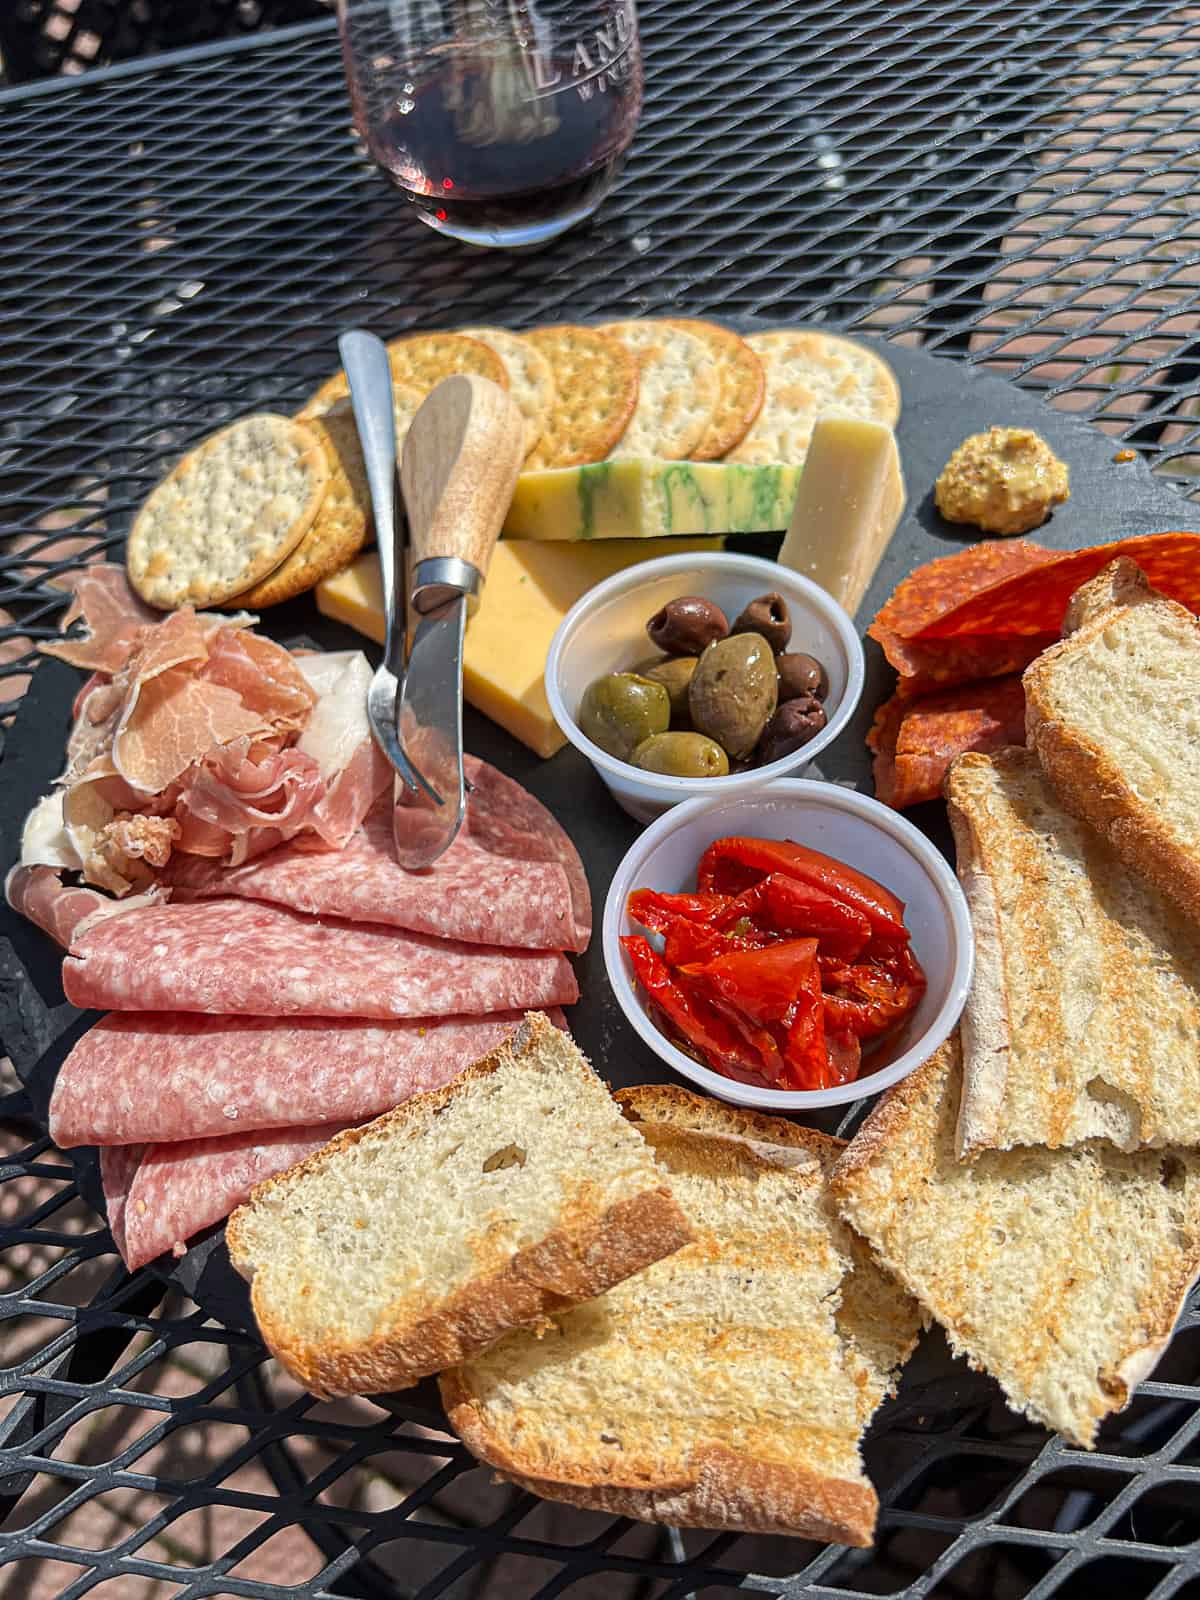 Landon Winery Charcuterie Menu Item and Wine in Downtown McKinney Texas